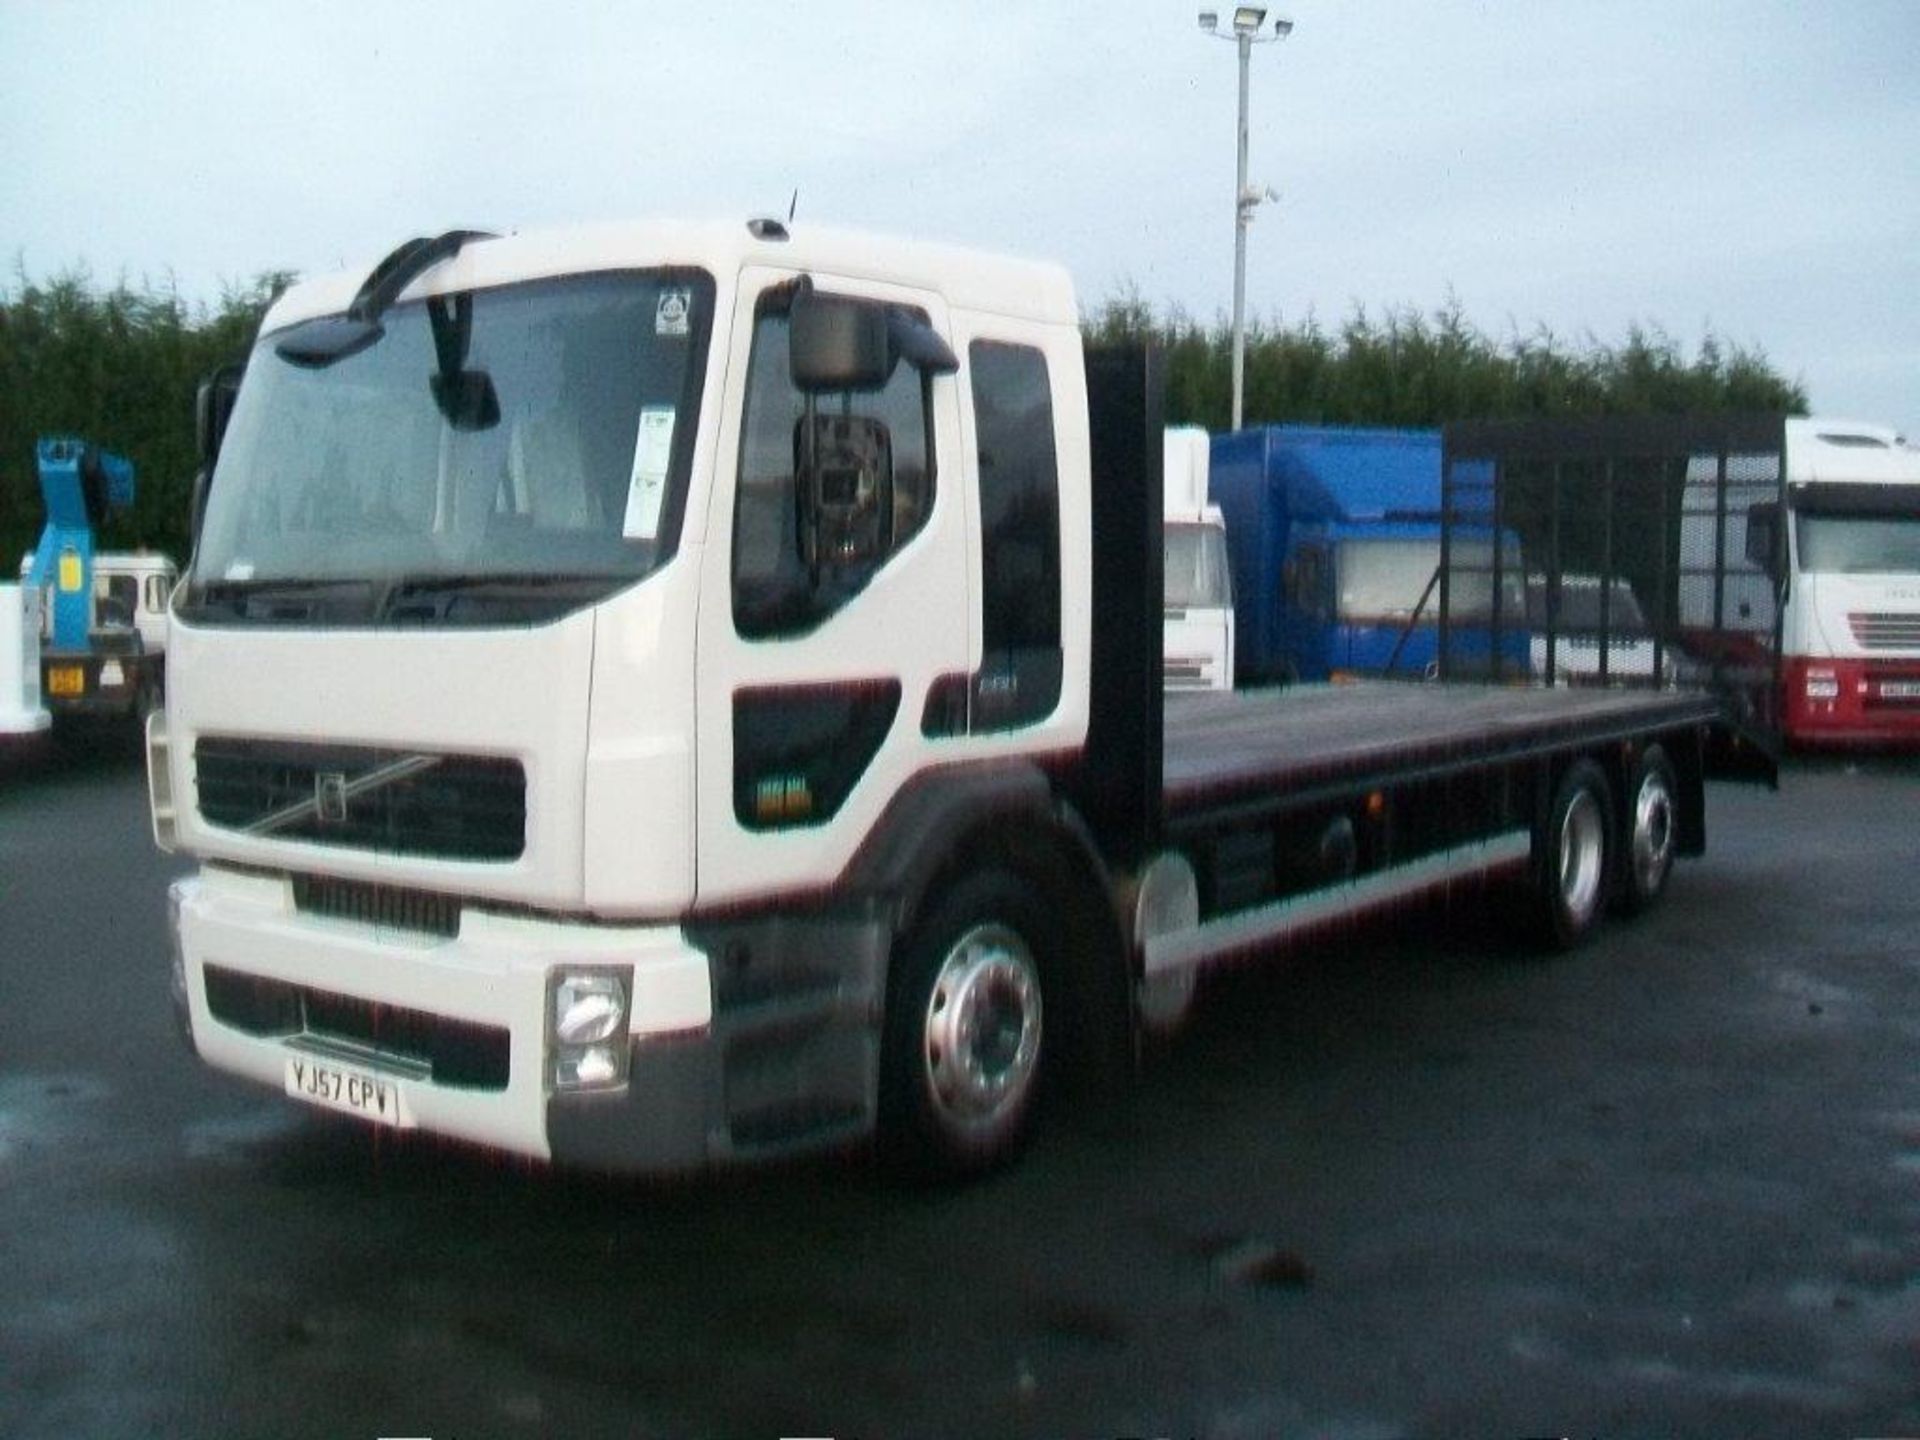 2008 / 57 Volvo FE280 Day Cab with Beavertail Body - Image 2 of 7